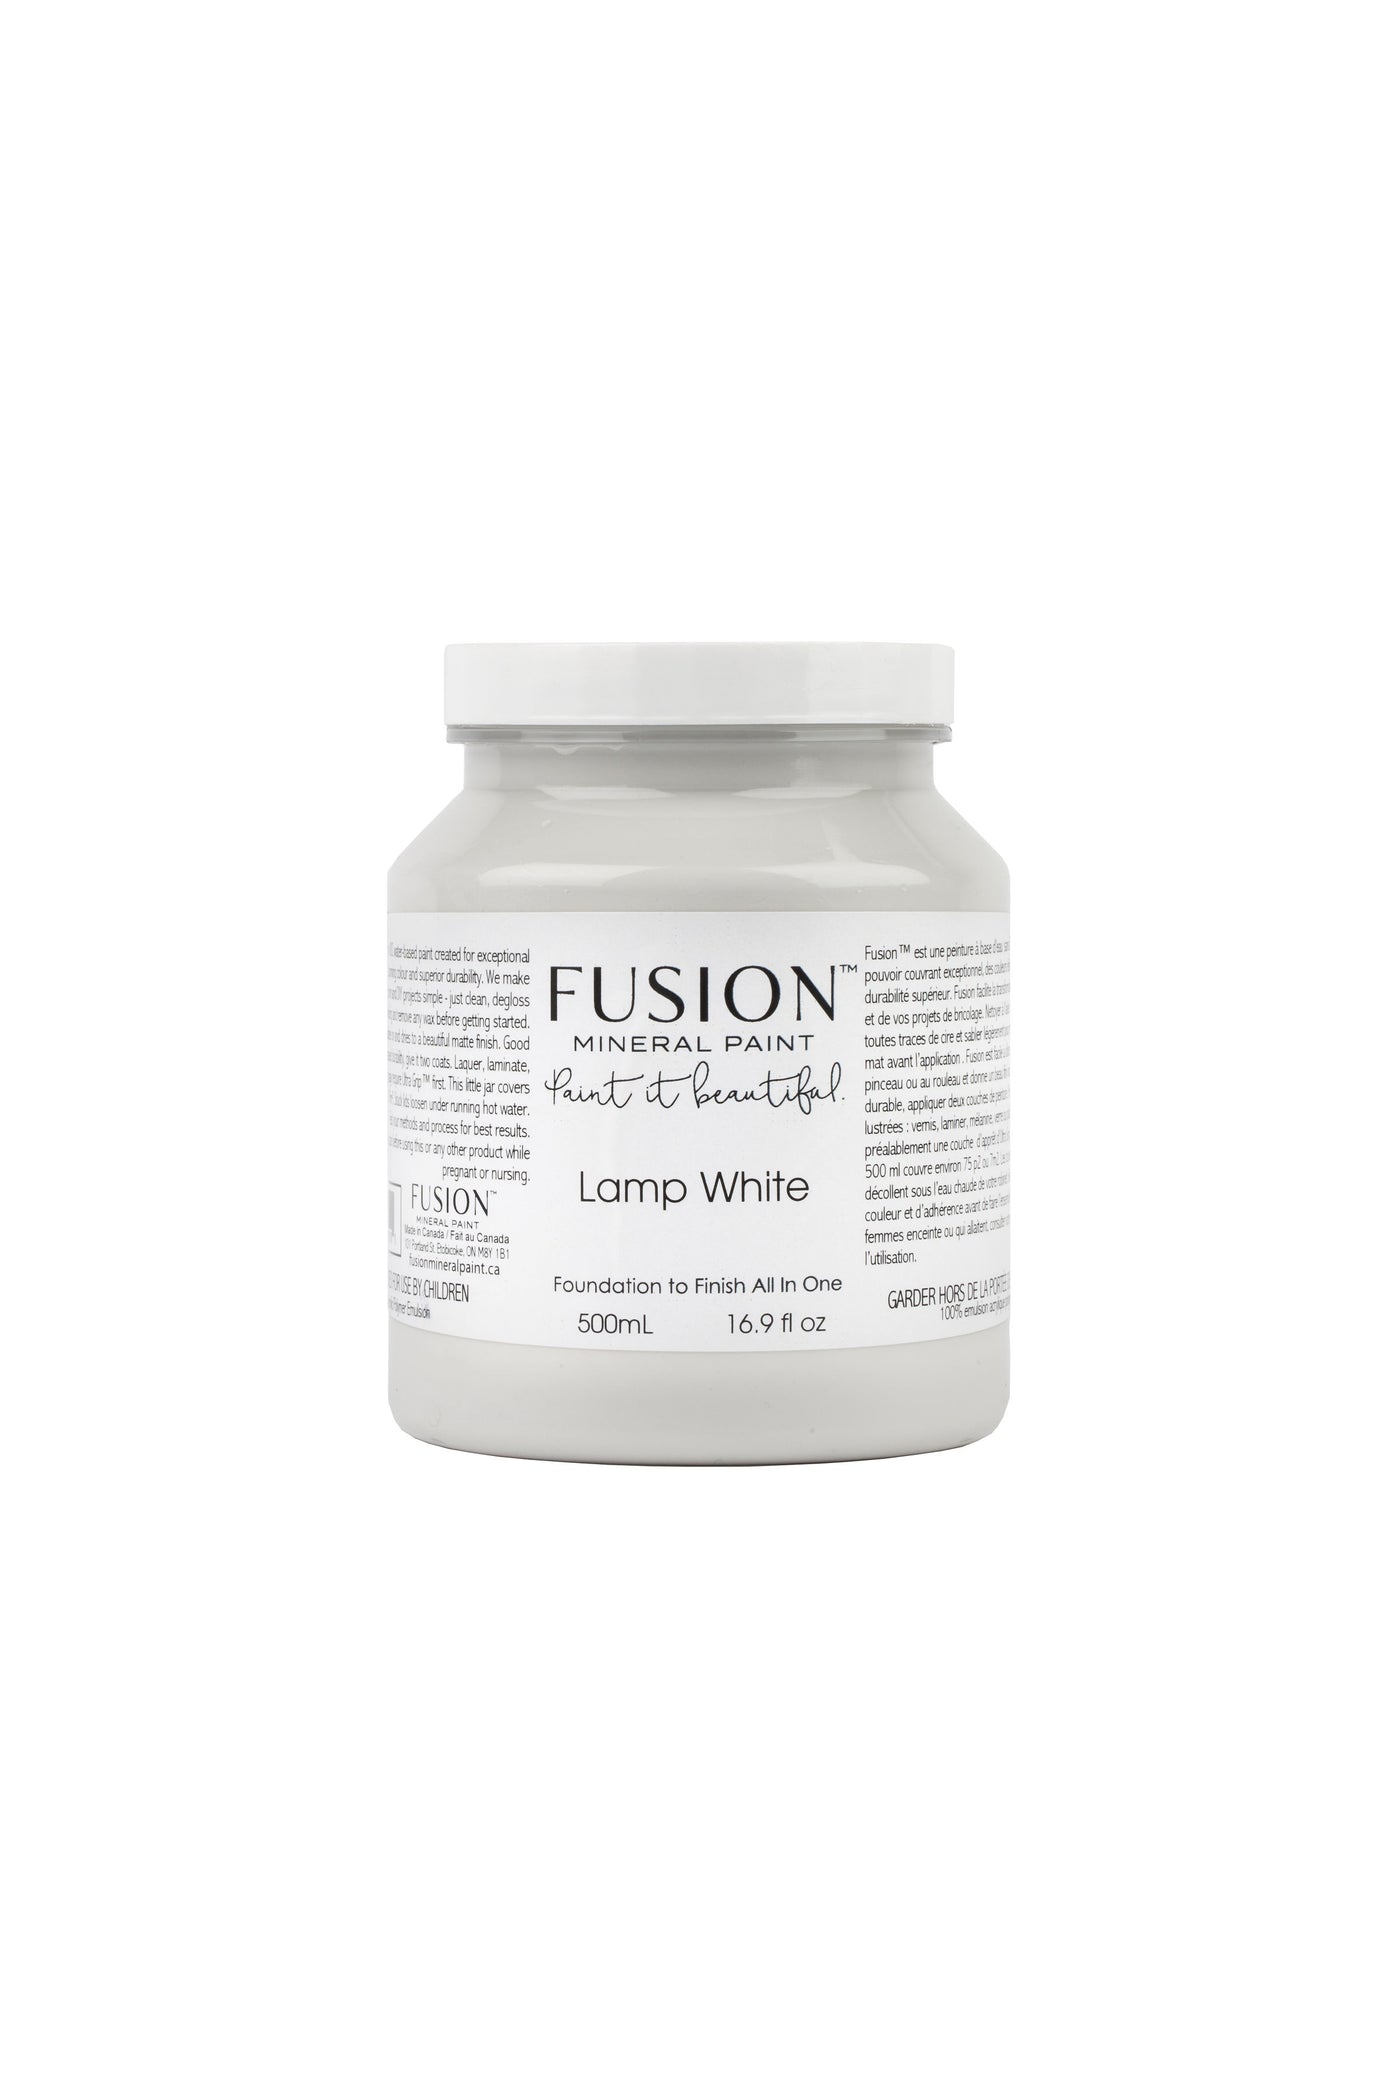 Fusion Mineral Paint Lamp White cool grey-white 500ml 